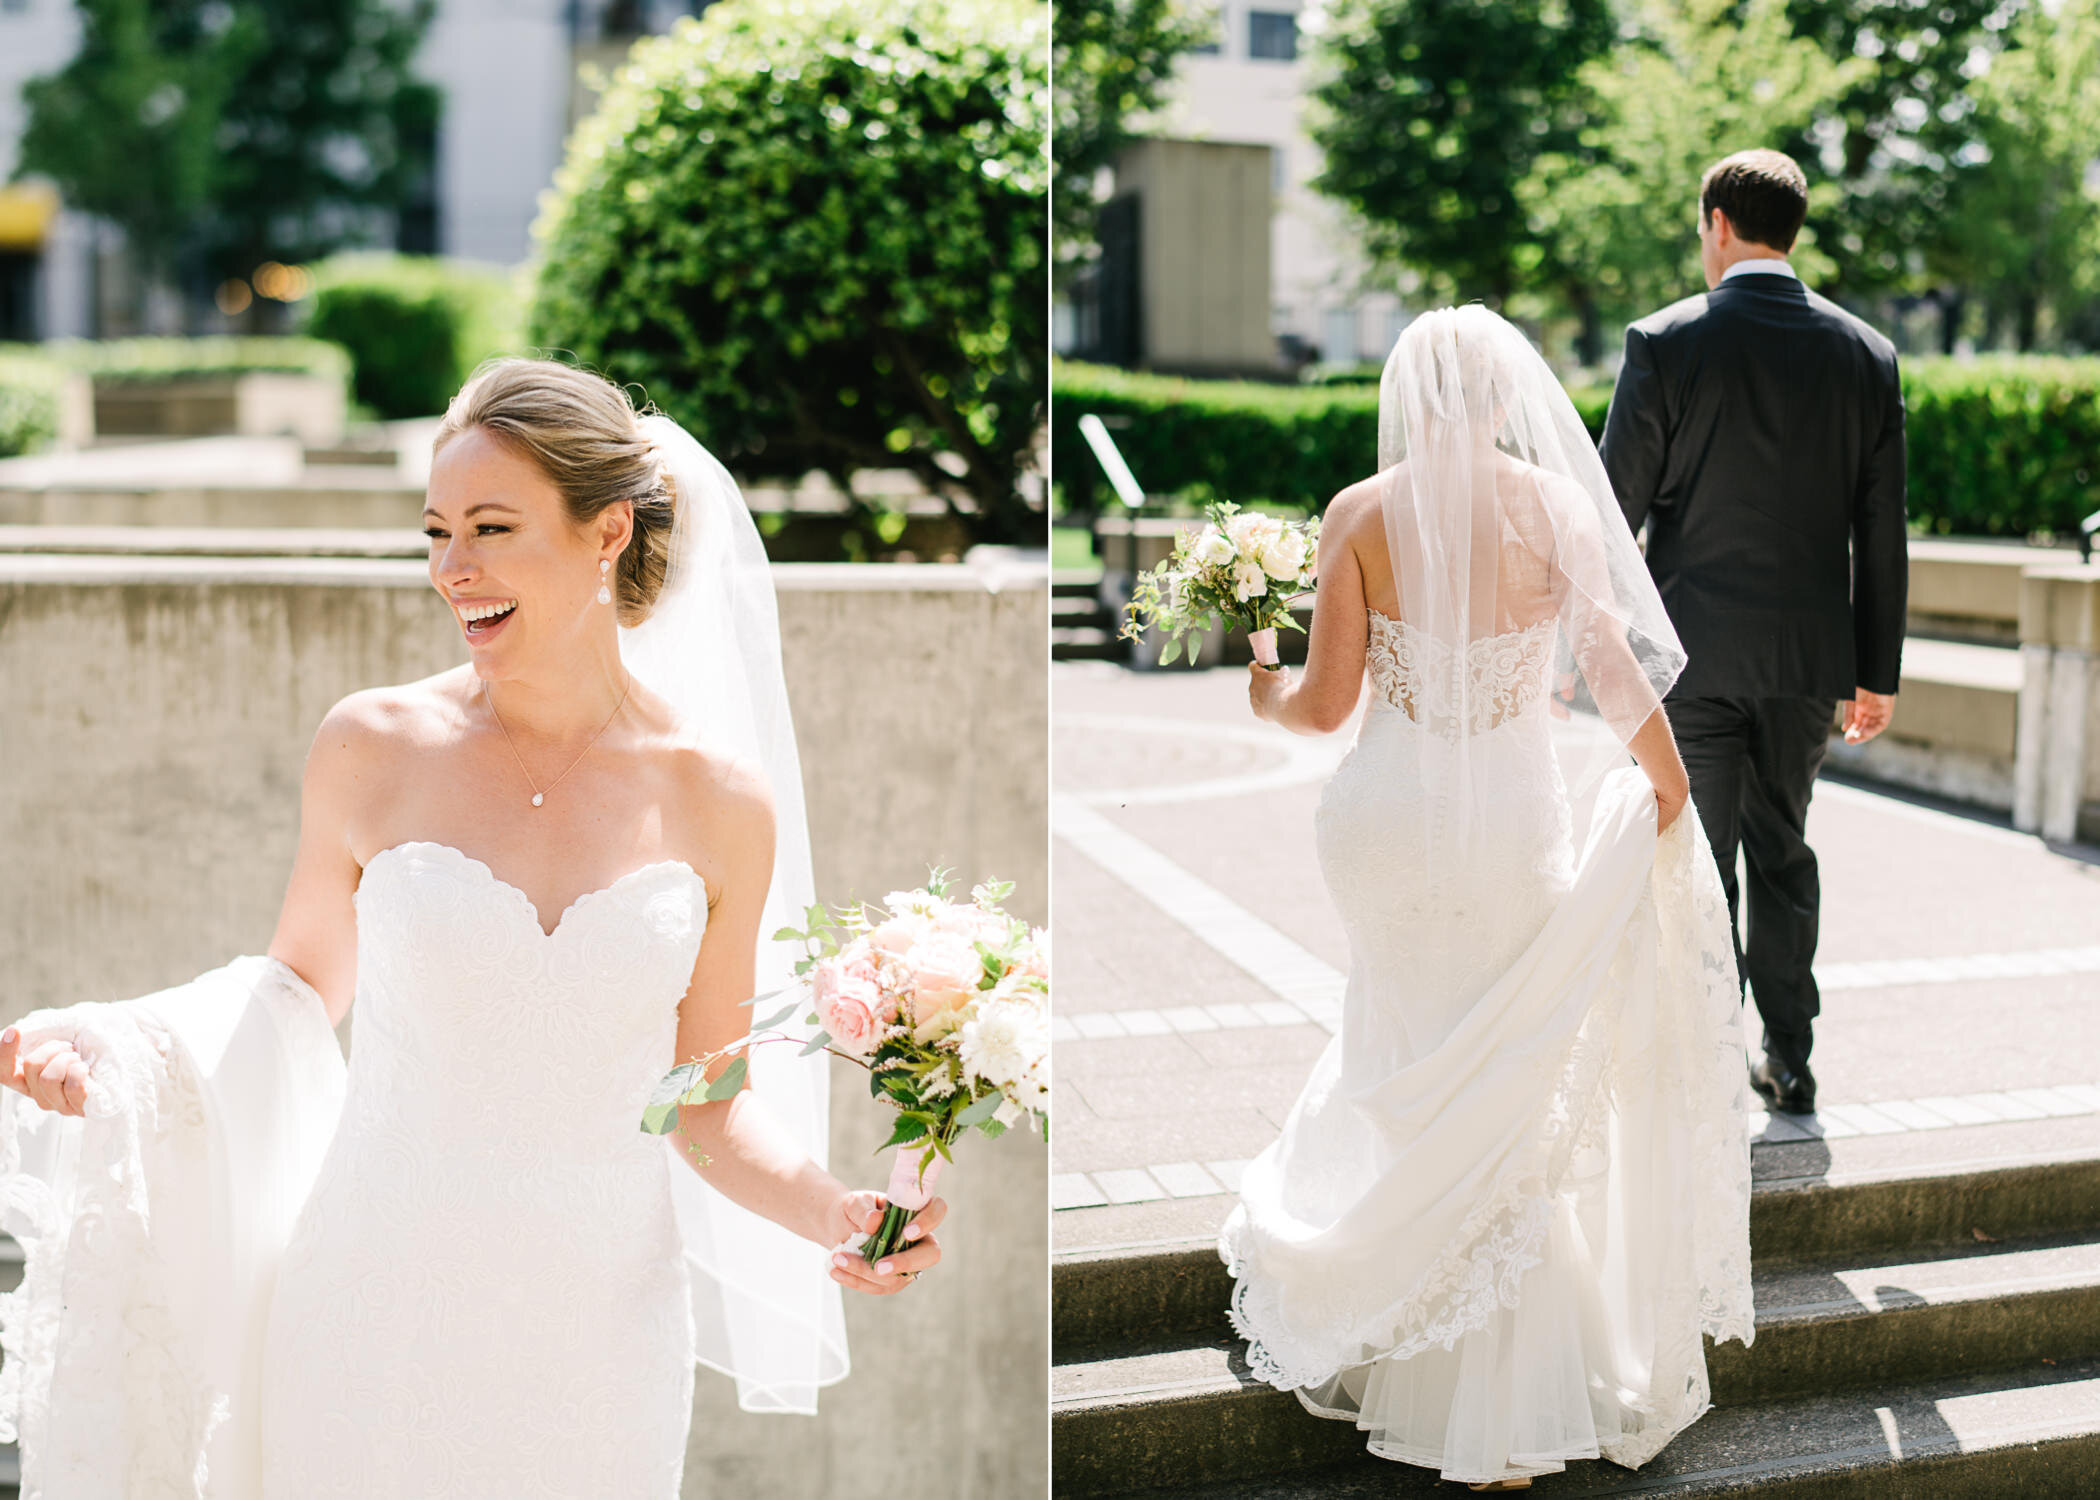  Bride laughing in sunshine as she holds her dress train in church courtyard 